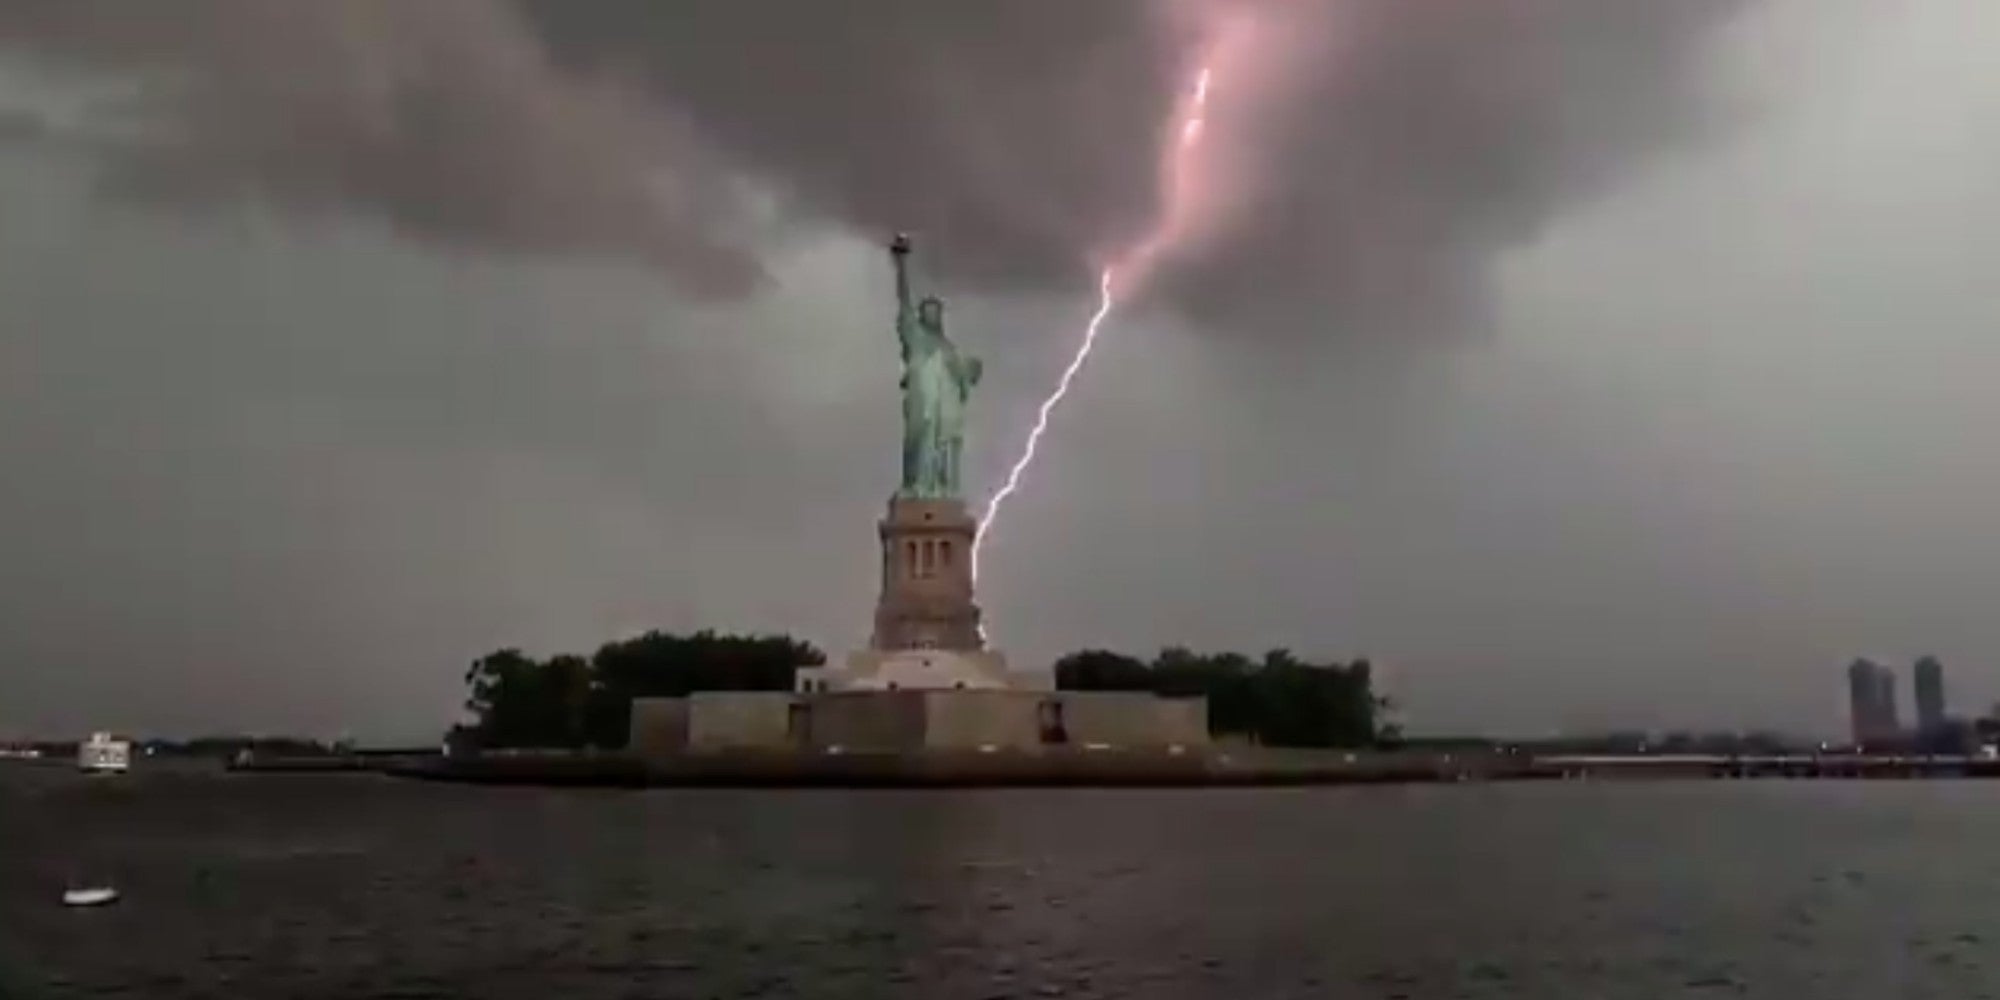 Statue of Liberty struck by lighting in stunning viral video indy100